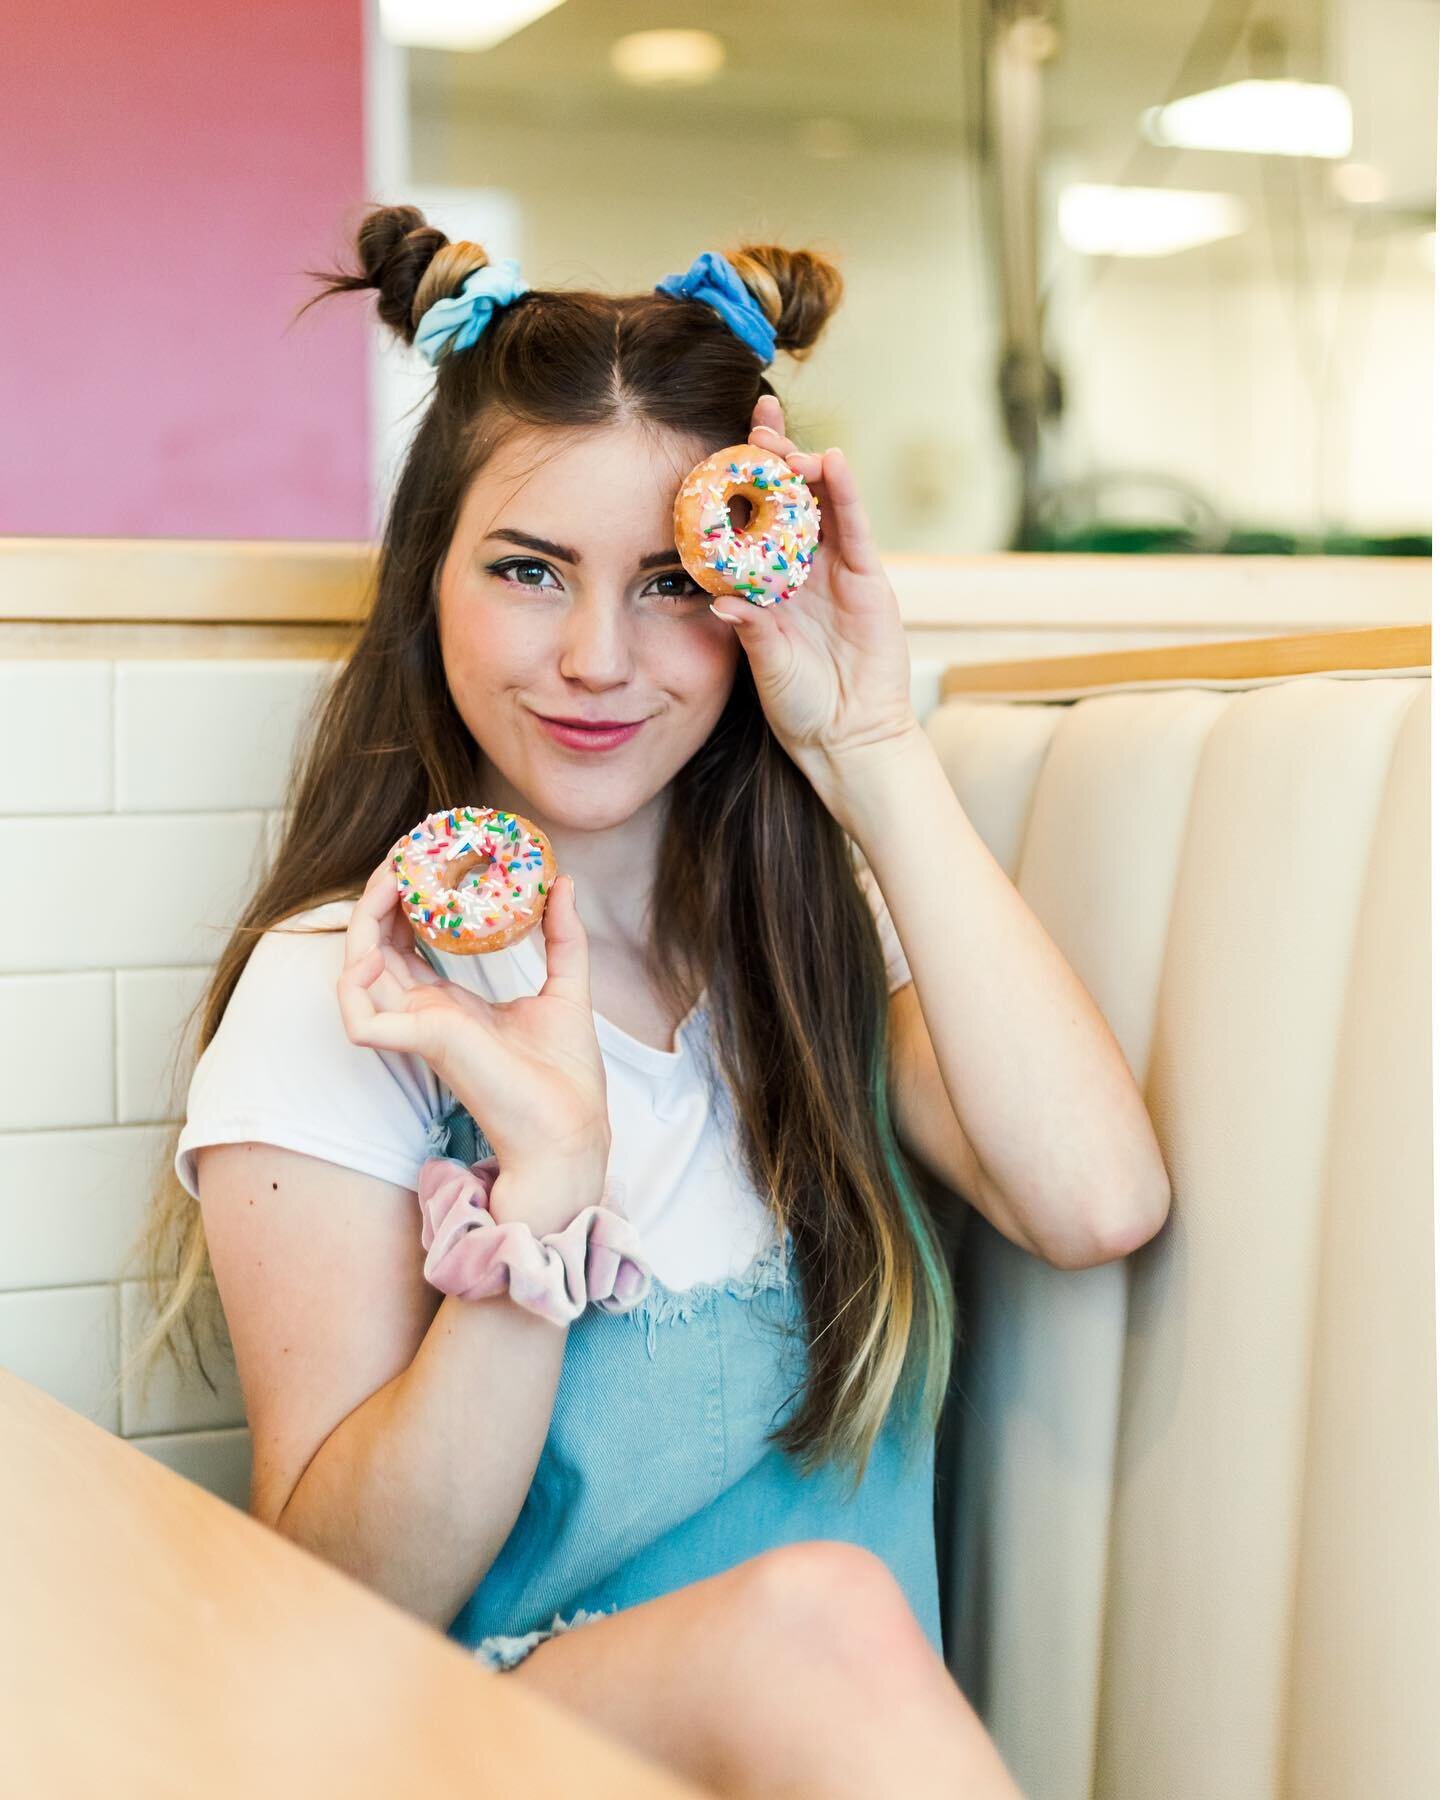 Celebrated National Donut Day with a fun stylized photoshoot! @talia.c.photography and I had a blast dressing up, taking photos of each other, and eating all the props! 🍩🤩
&mdash;
Simply,
Sarah Bagarah
.
.
.
#417photographer #417local #417creatives